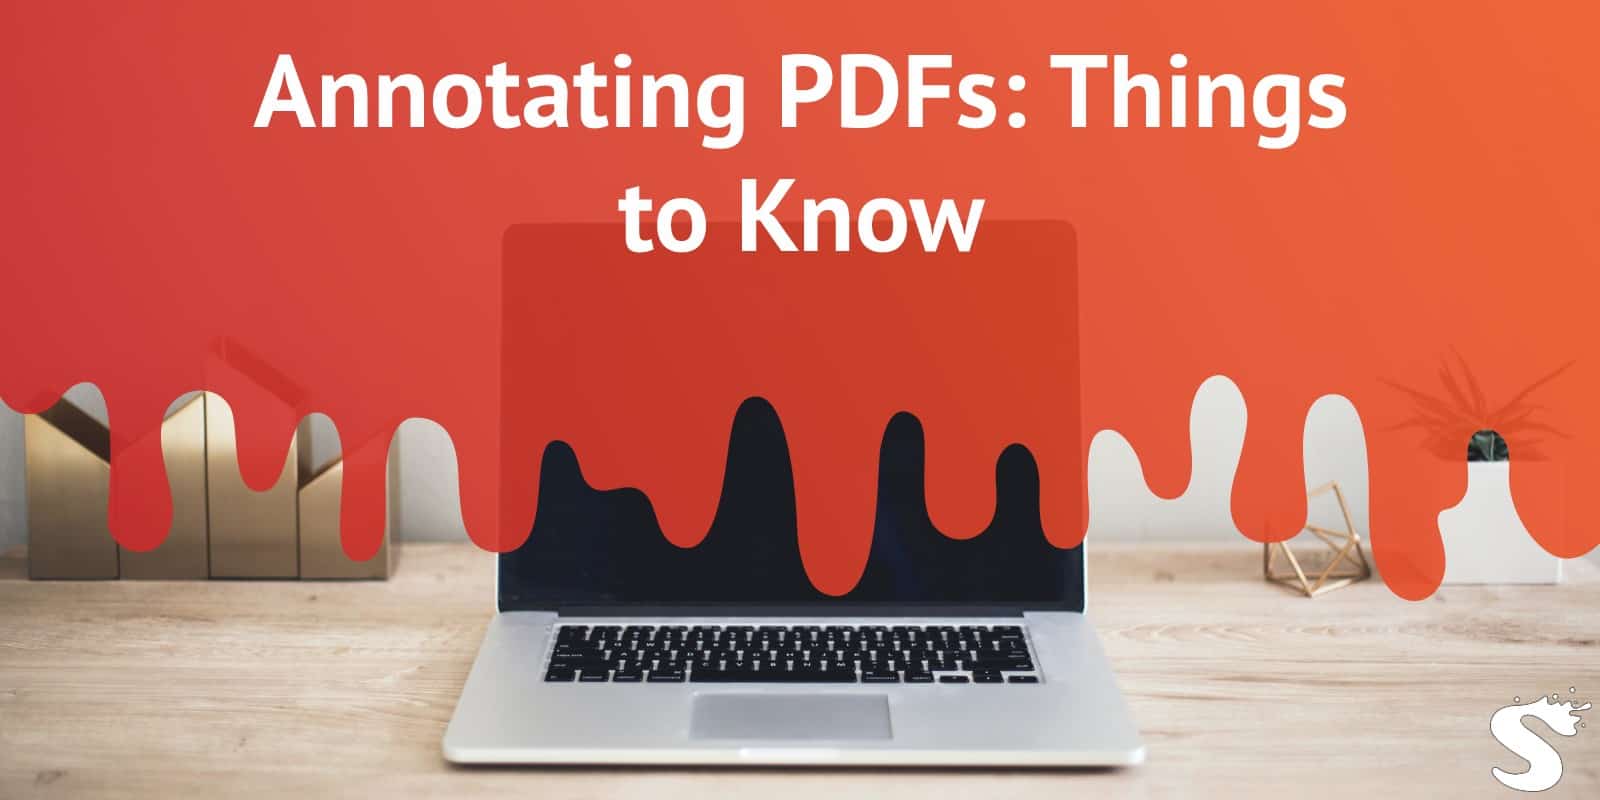 Annotating PDFs: Things to Know